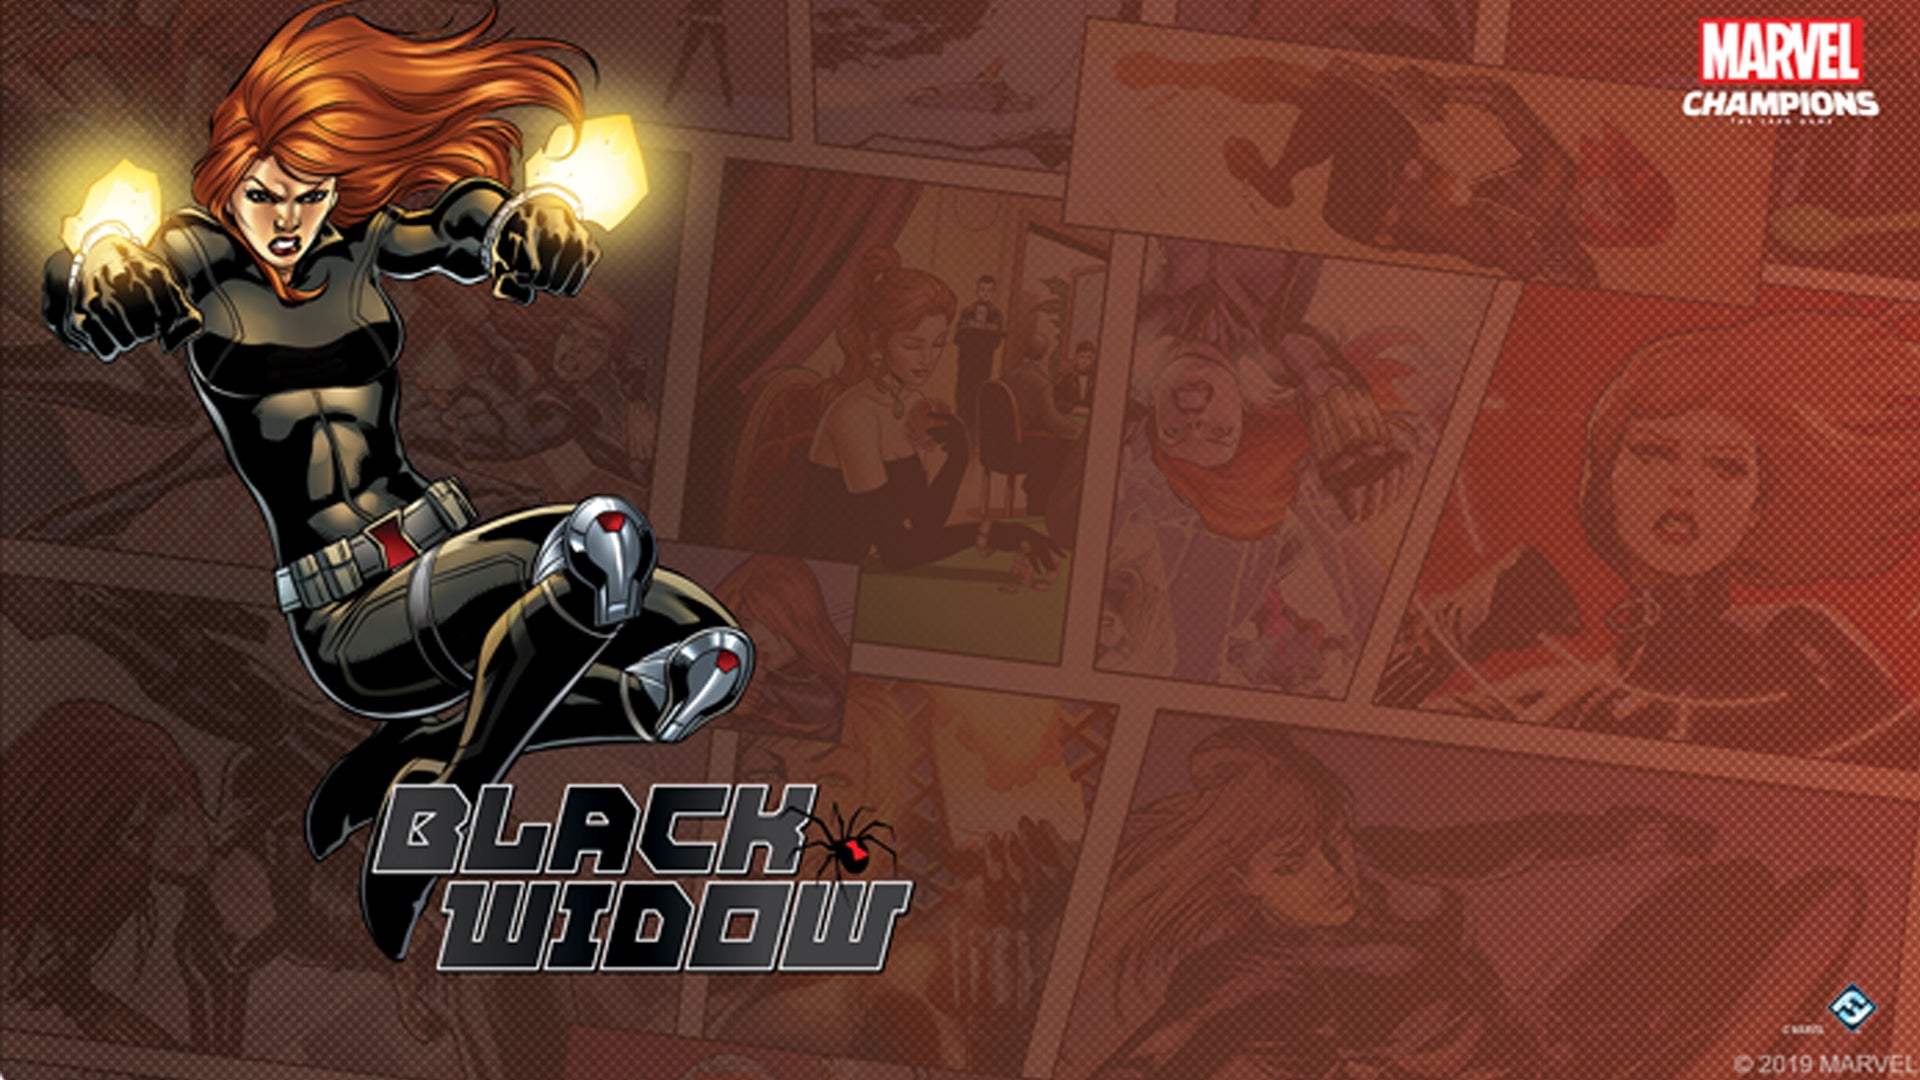 Black Widow is the next Avenger to join Marvel Champions